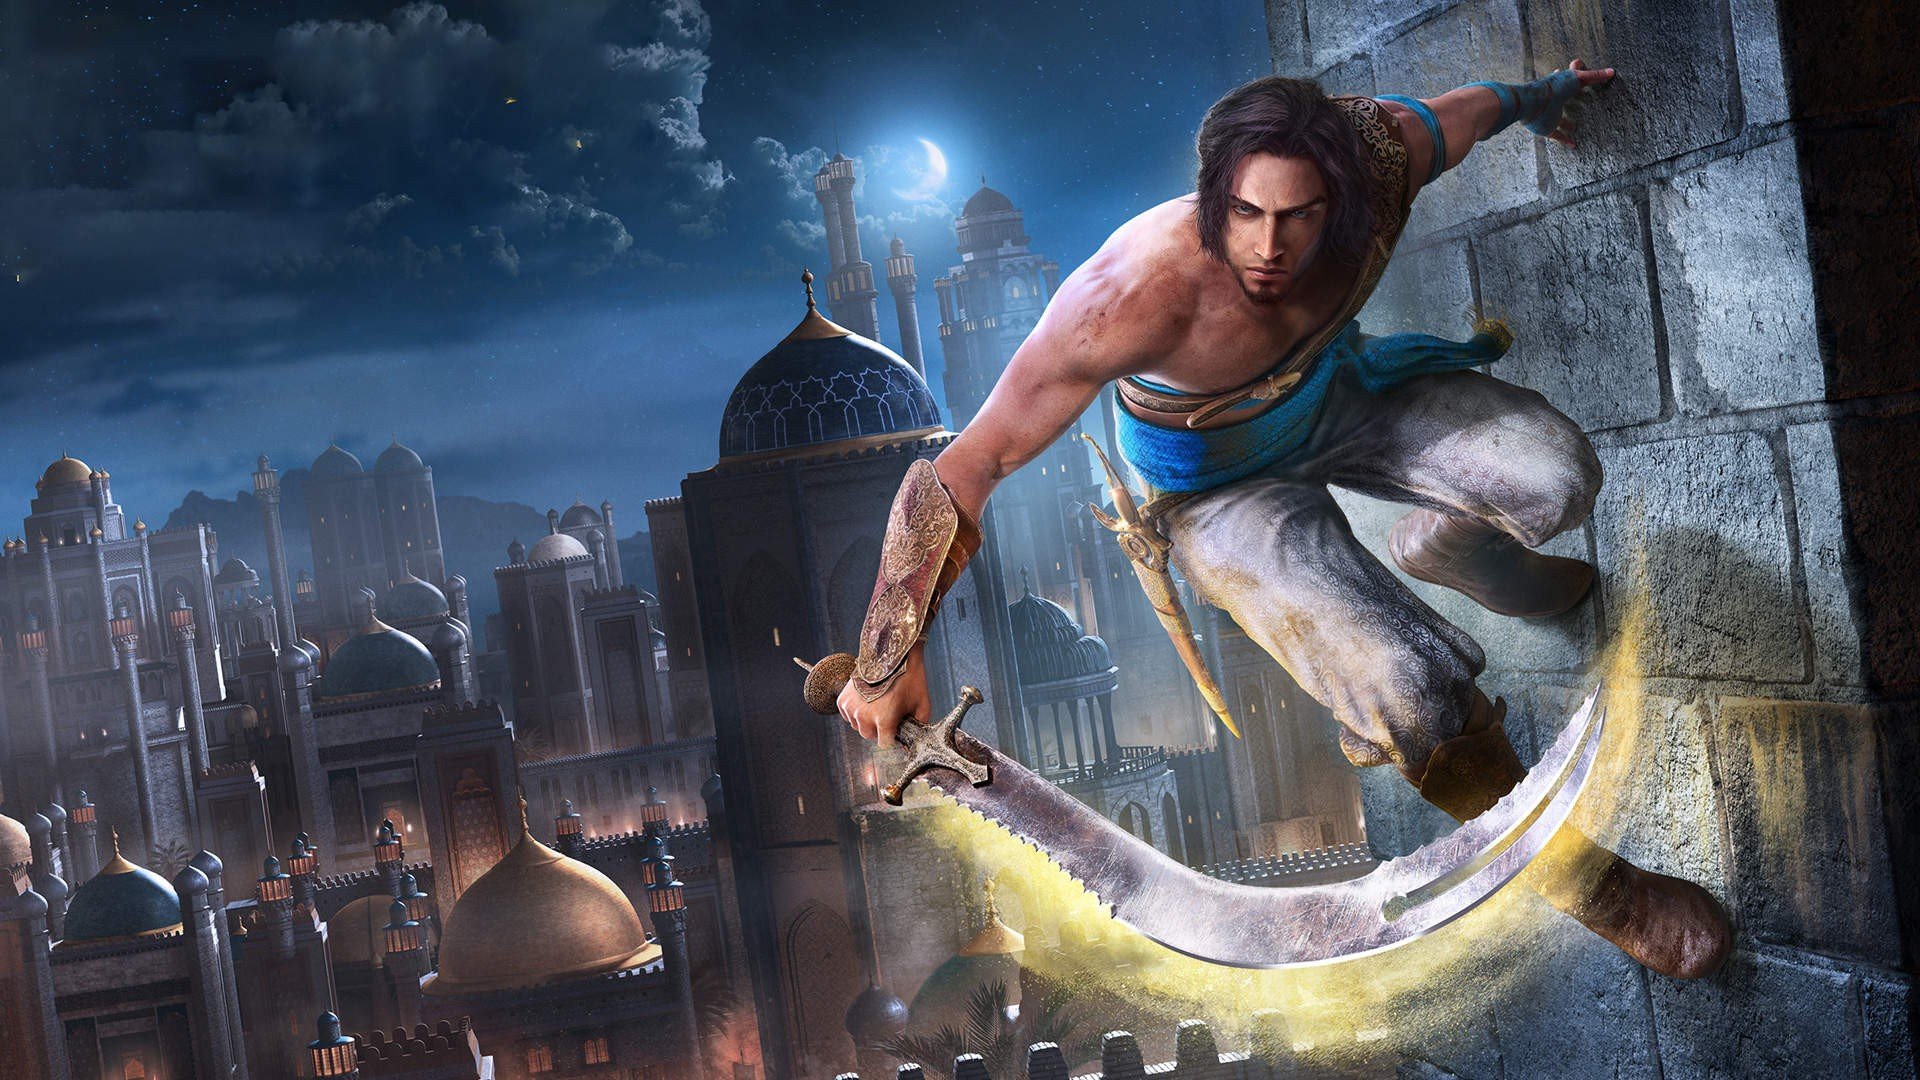 Jogo The Prince of Persia The Lost Crown - Ps4